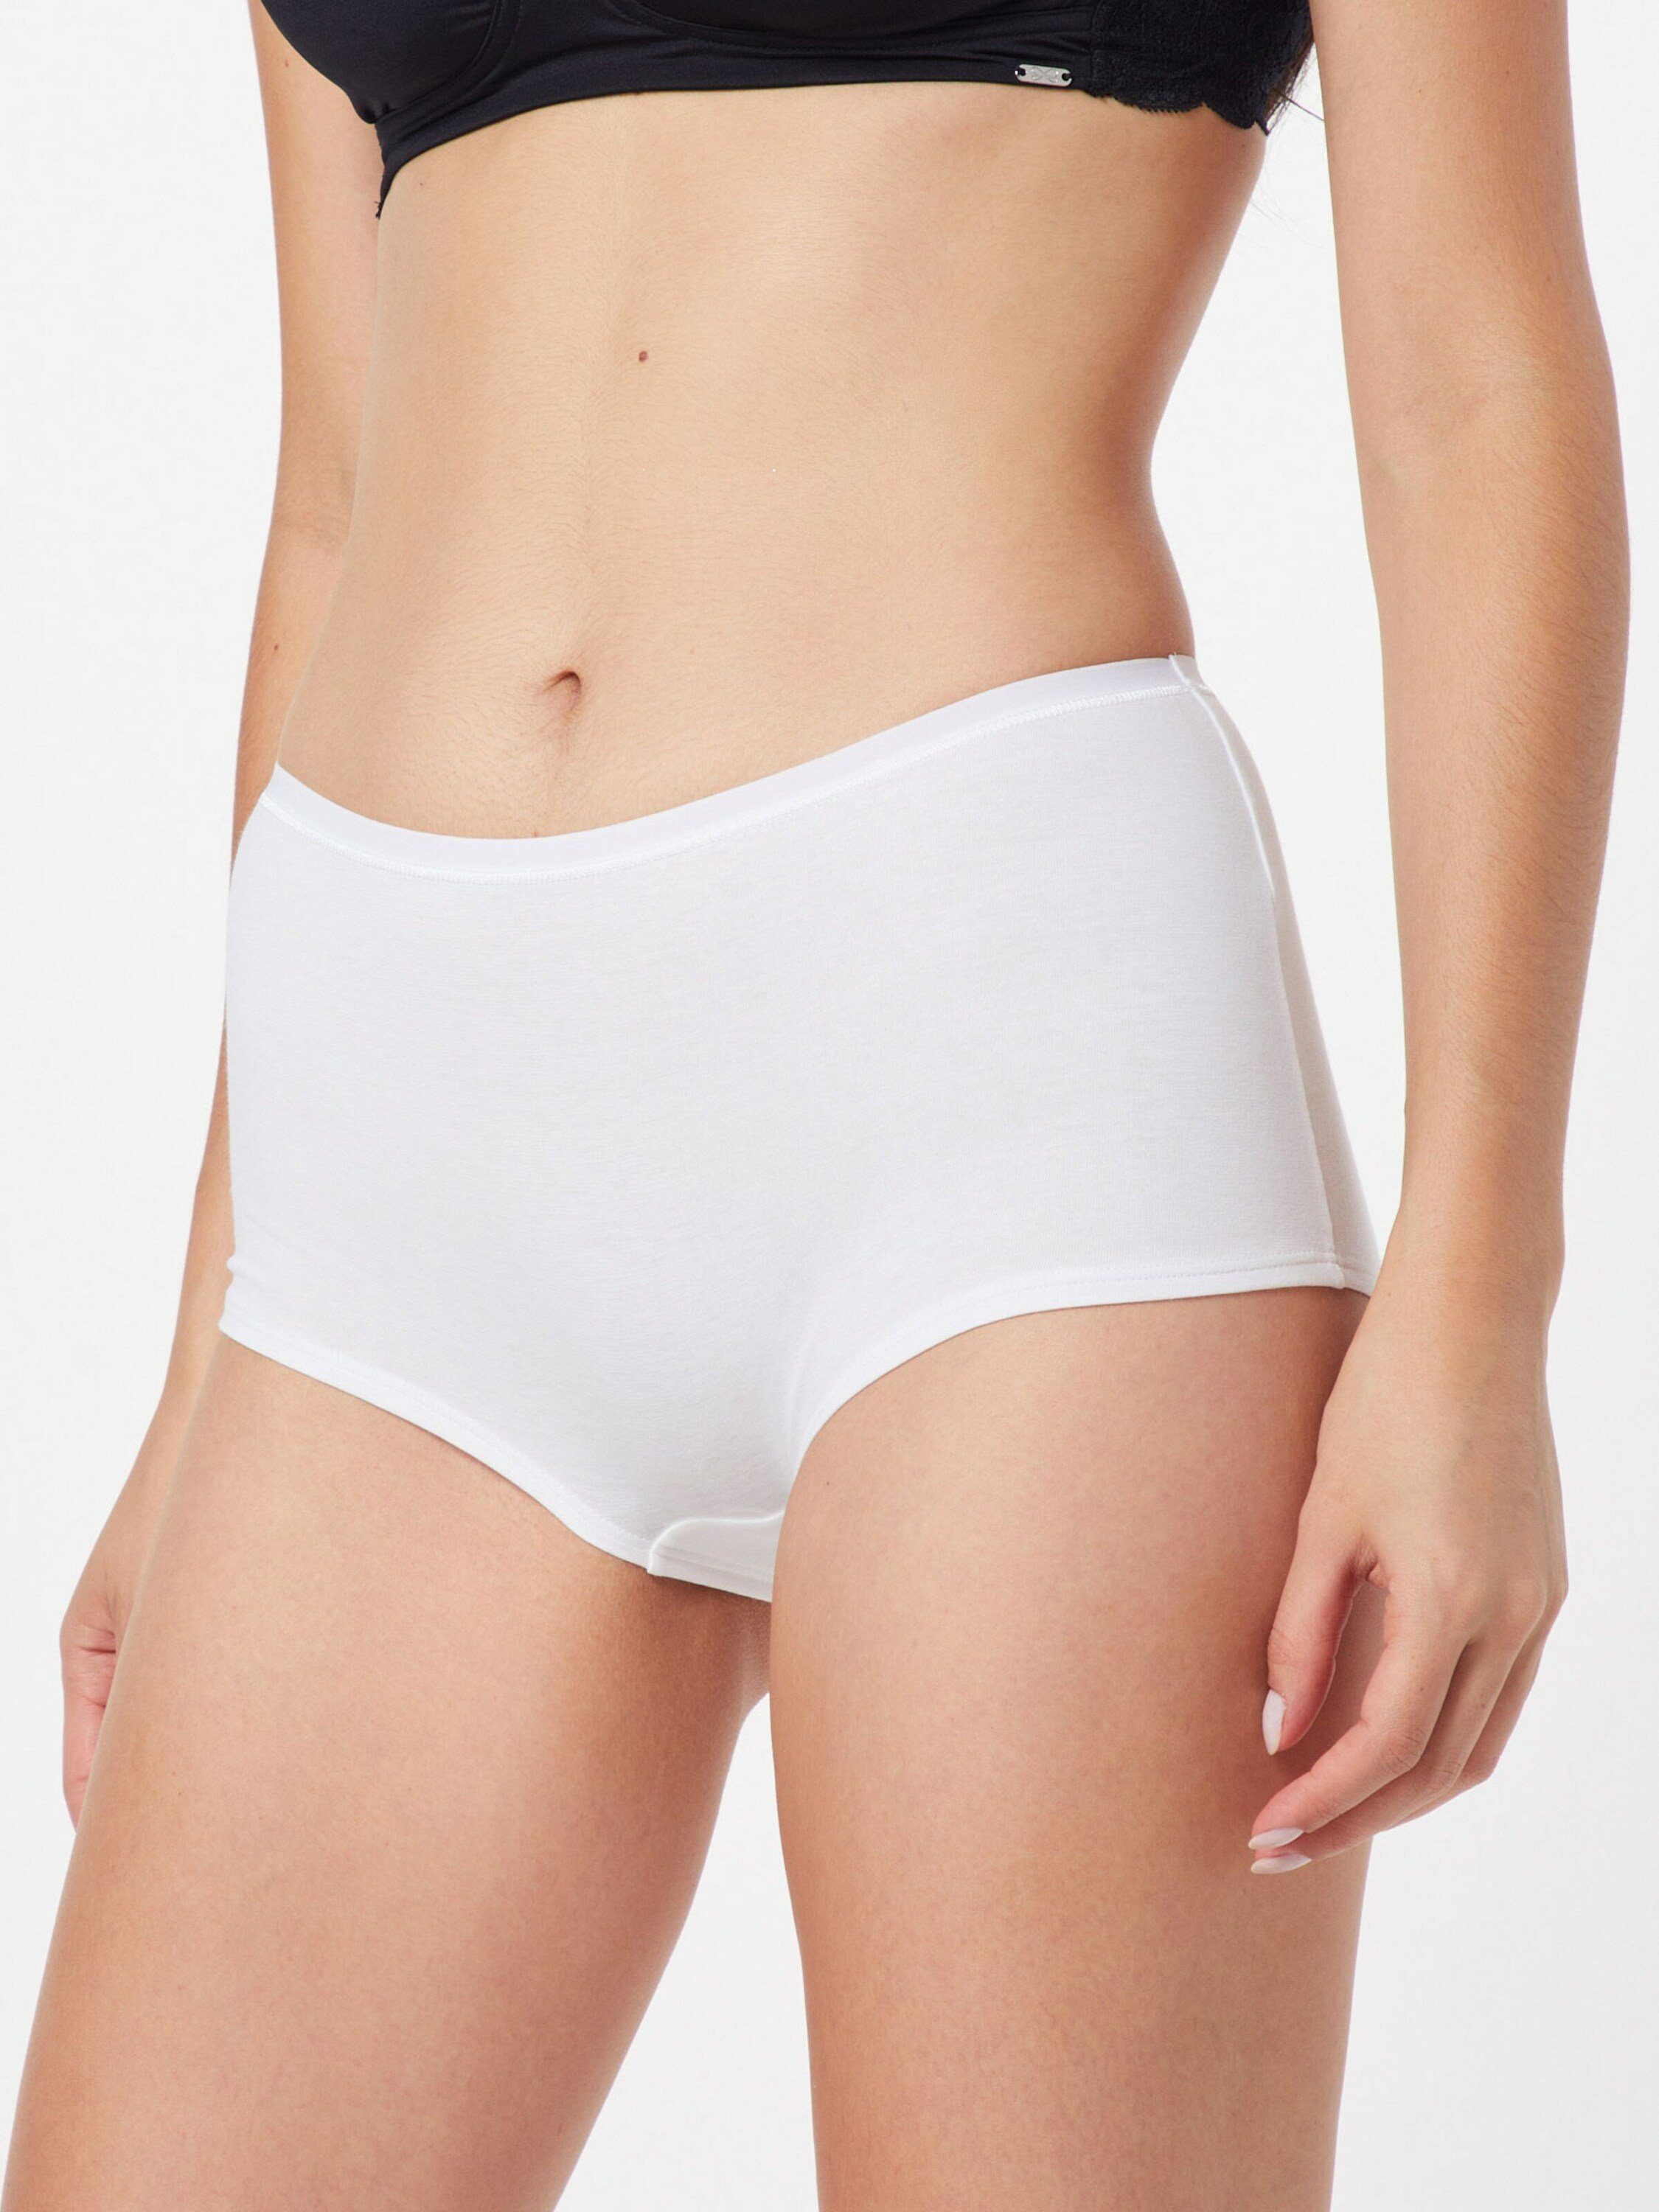 Panty Details CALIDA (2-St) Plain/ohne weiss